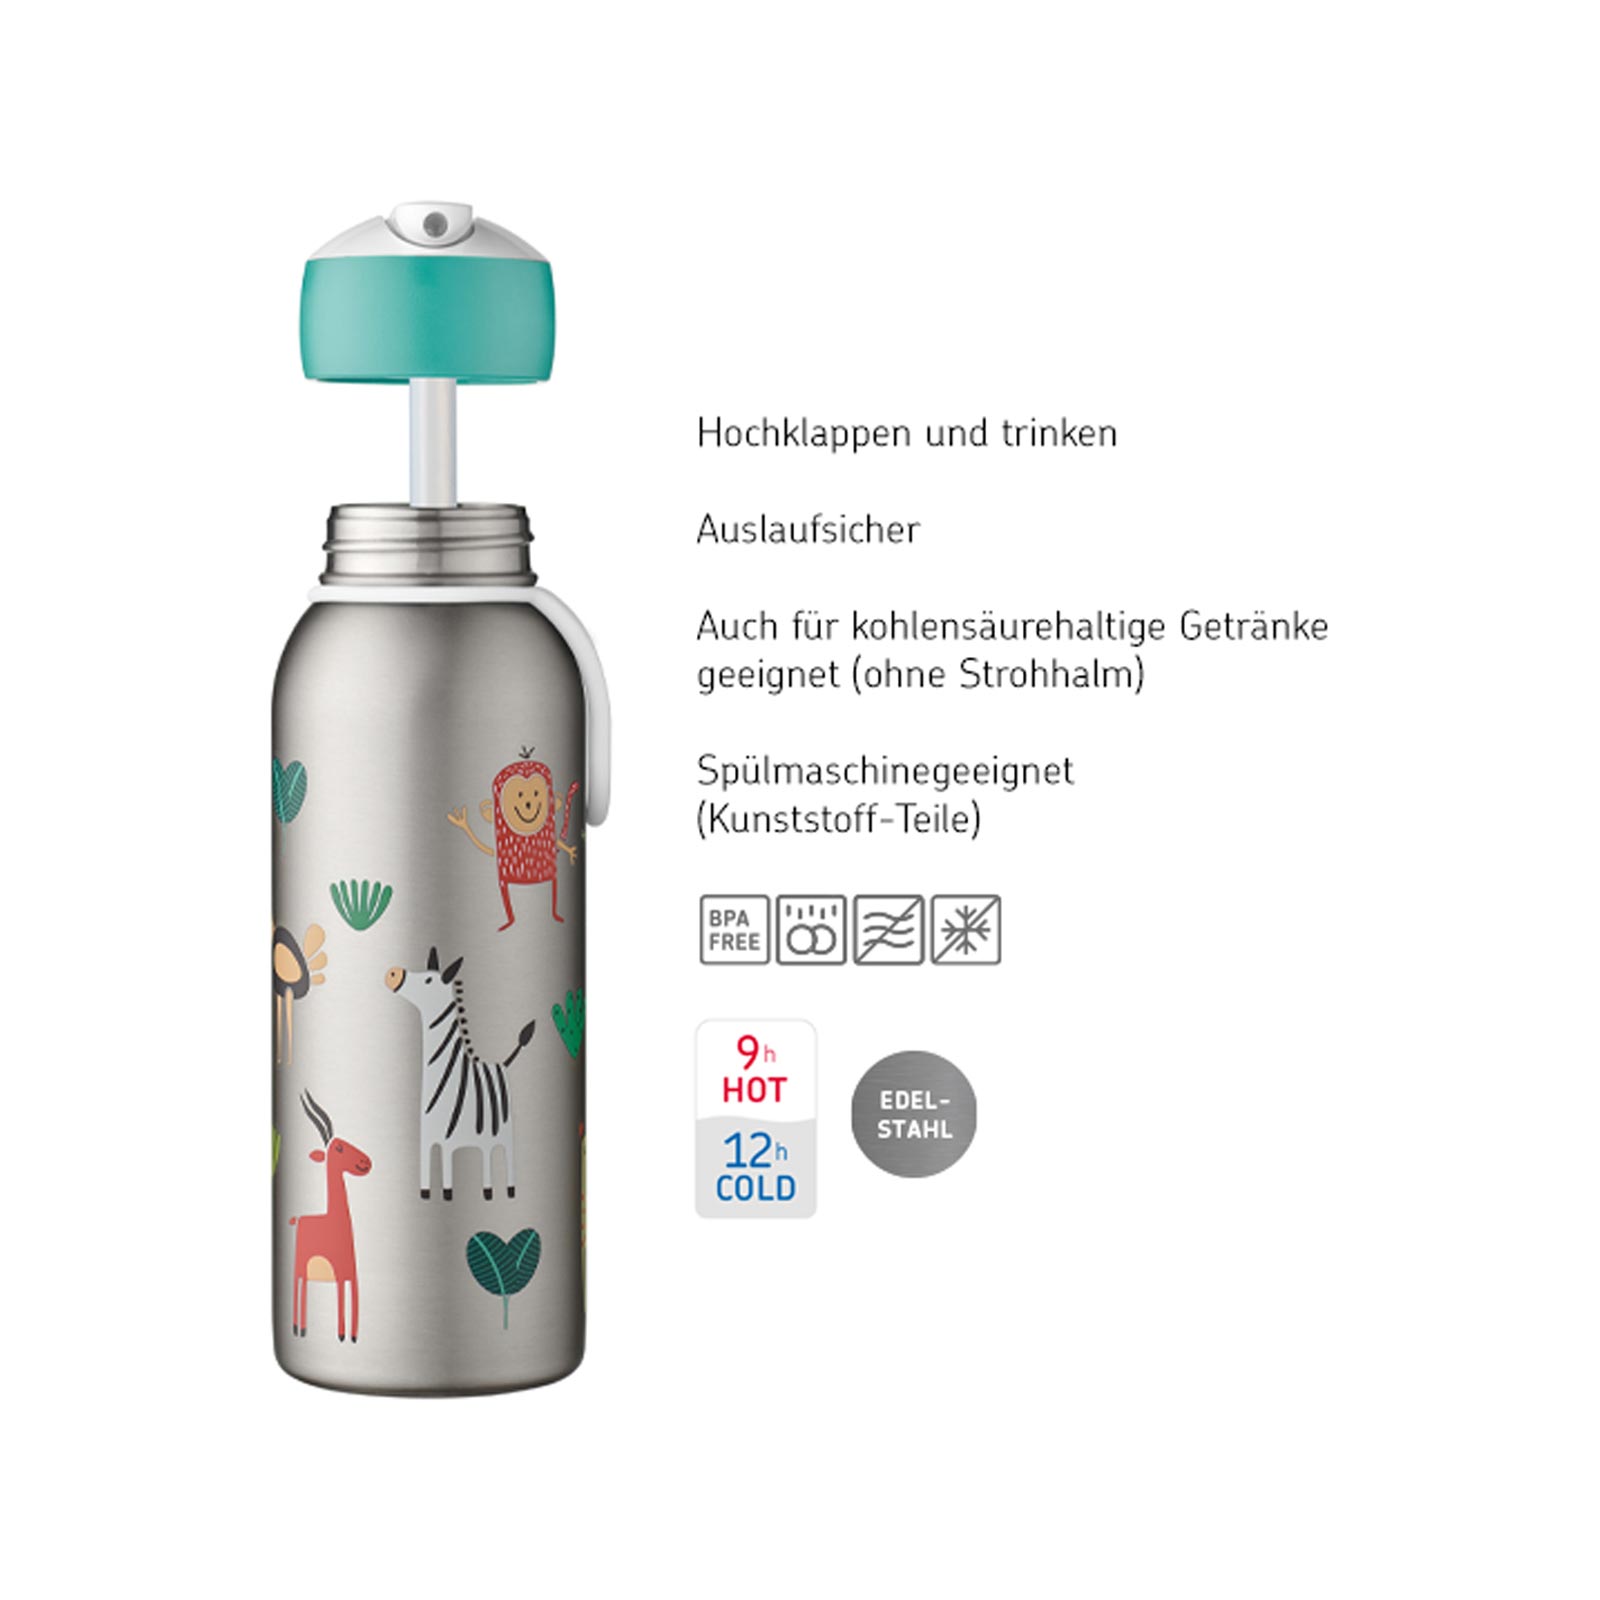 Mepal CAMPUS Thermoflasche Flip-Up 350 ml Paw Patrol Pups